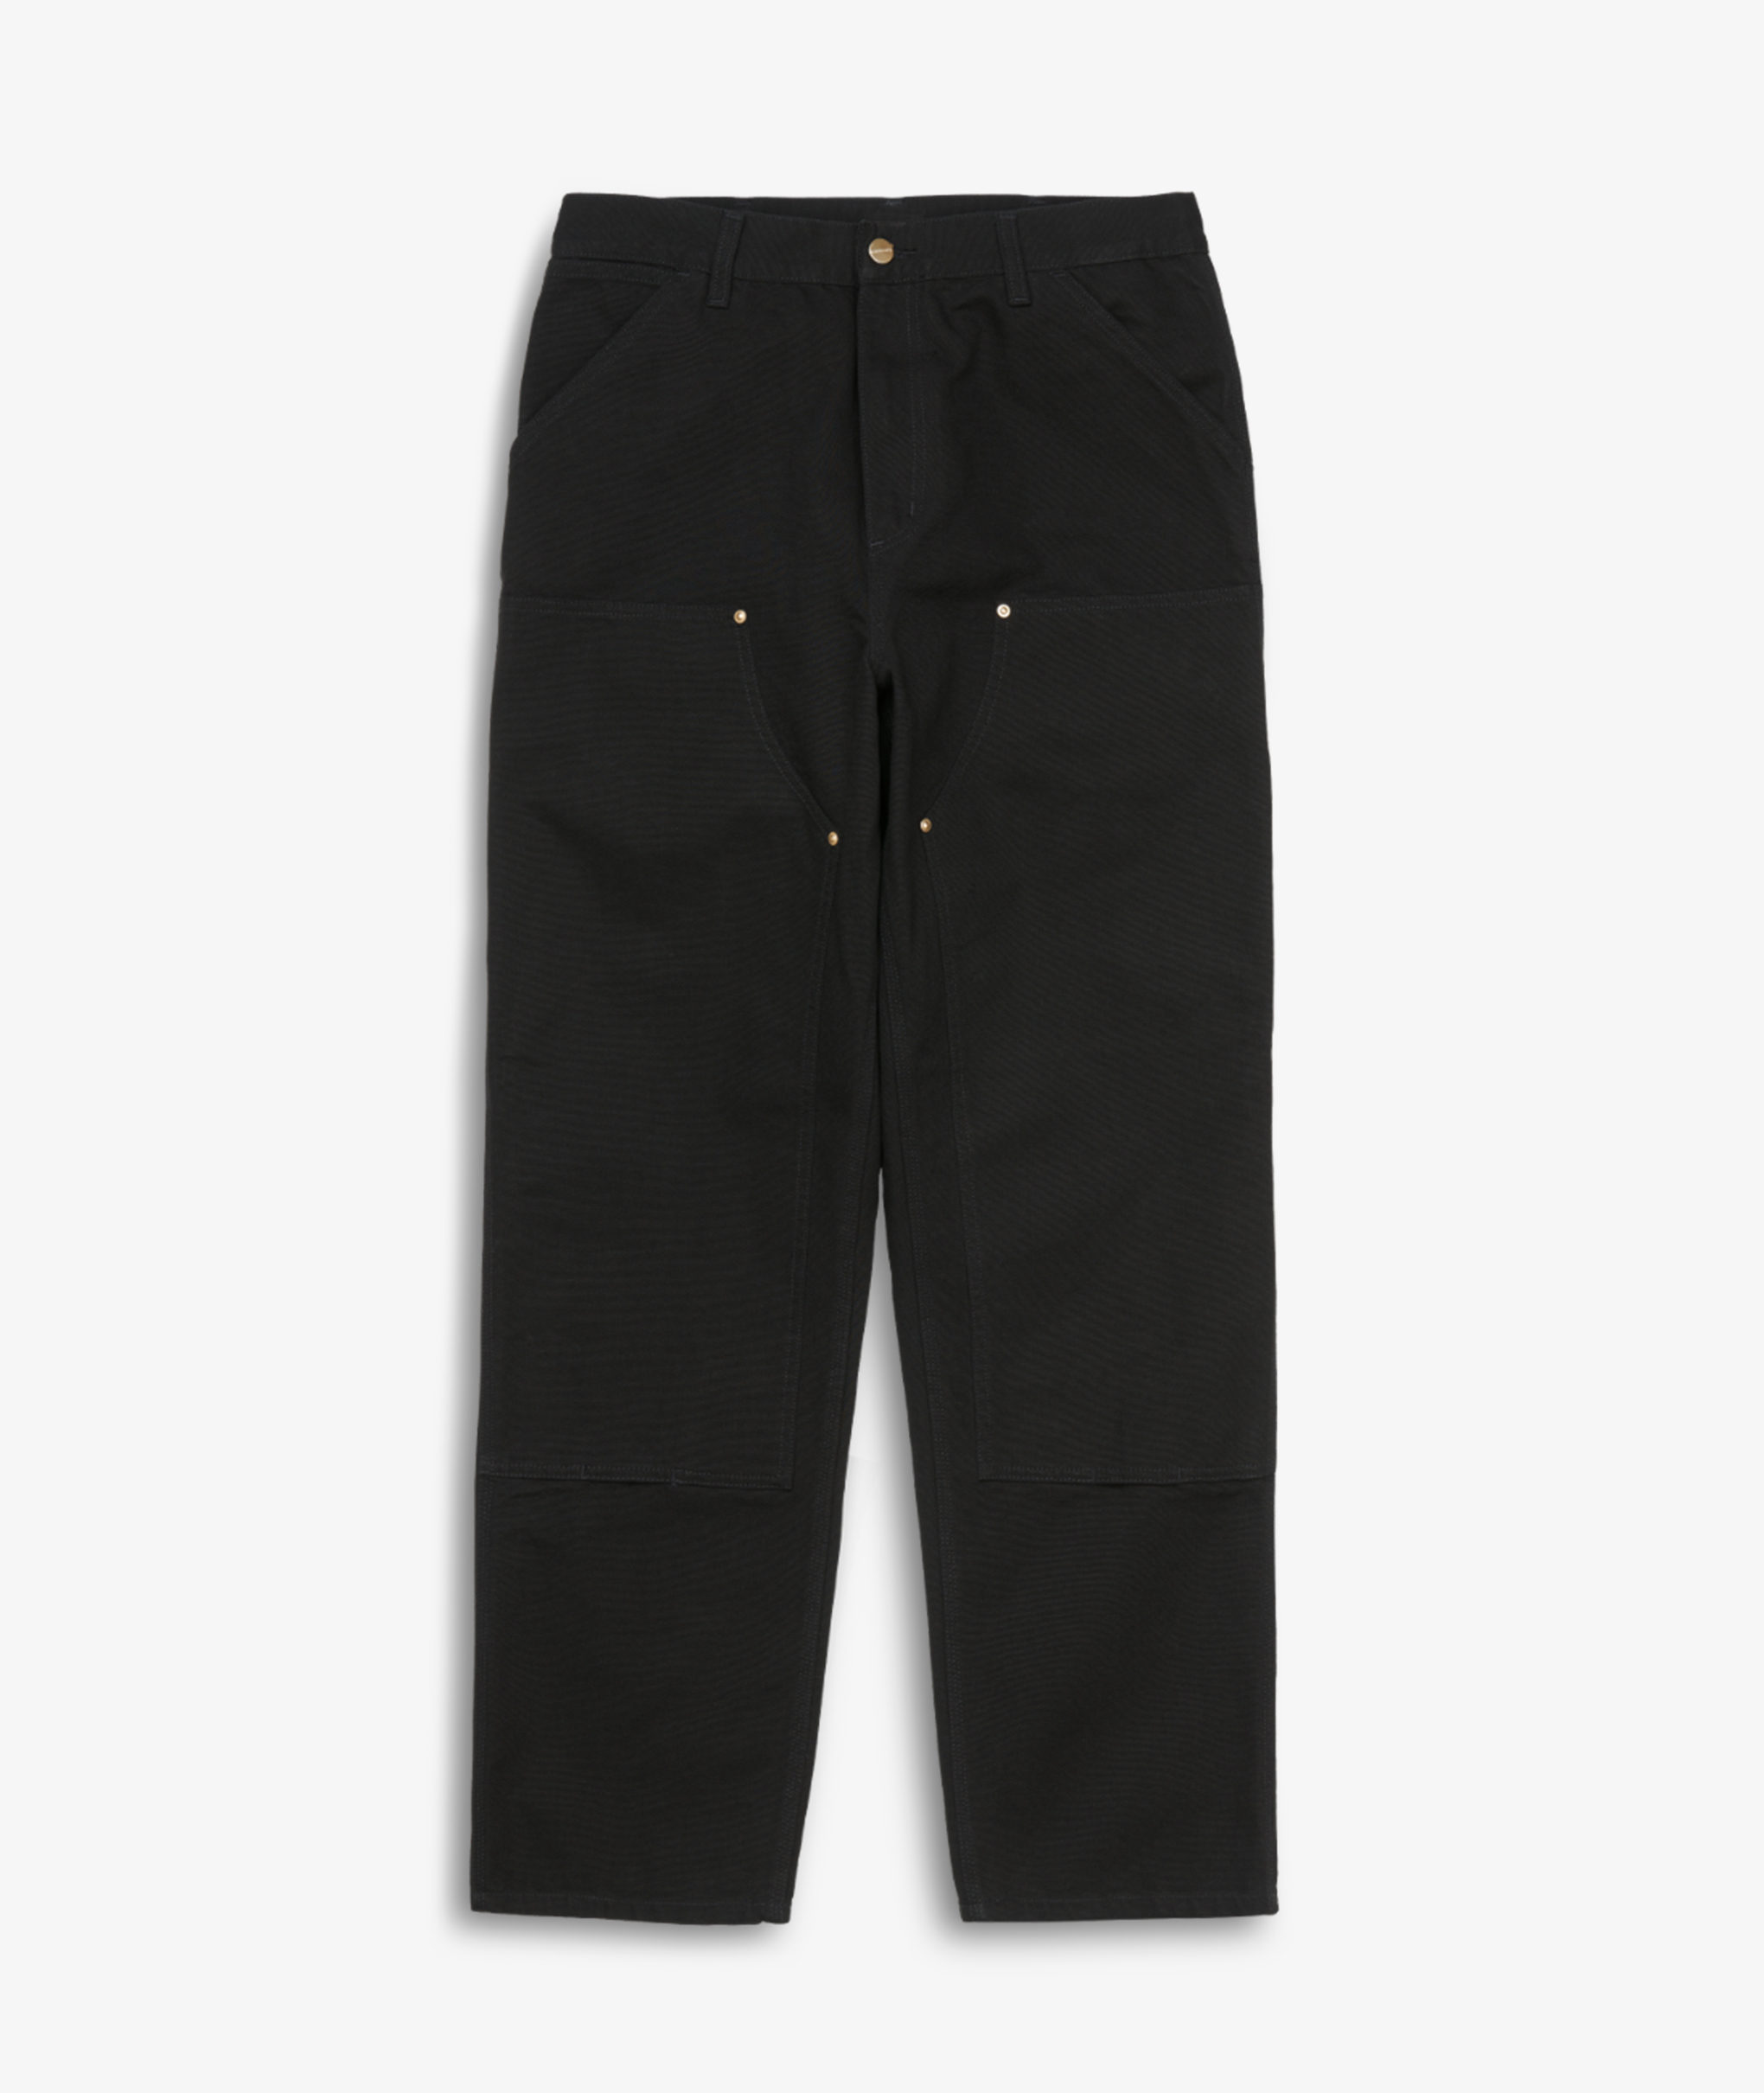 Norse Store | Shipping Worldwide - Carhartt WIP Double Knee Pant ...